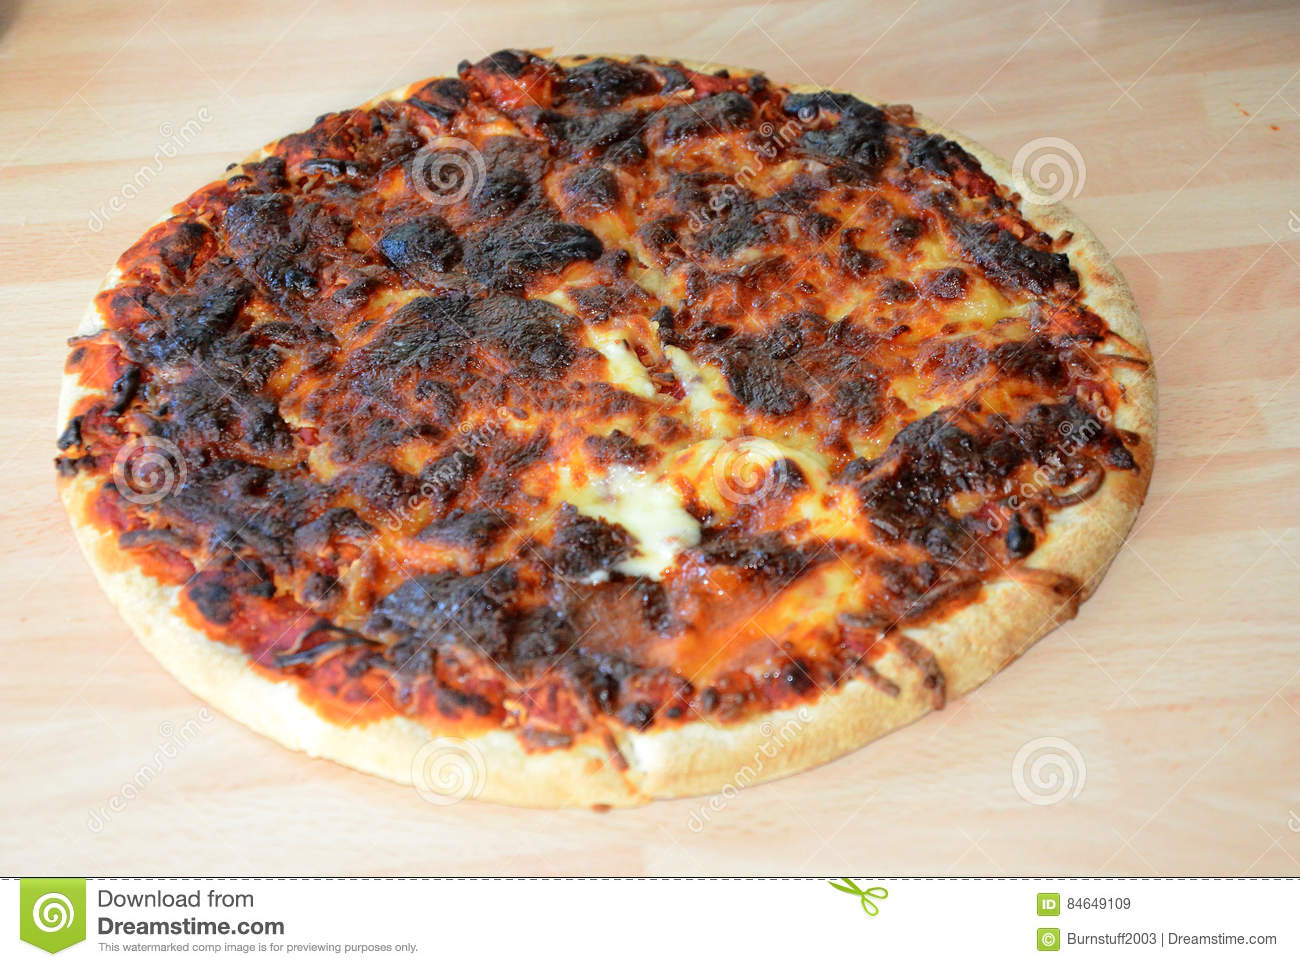 Dinner-burned-pizza-bad-cooking-cheese-84649109-a